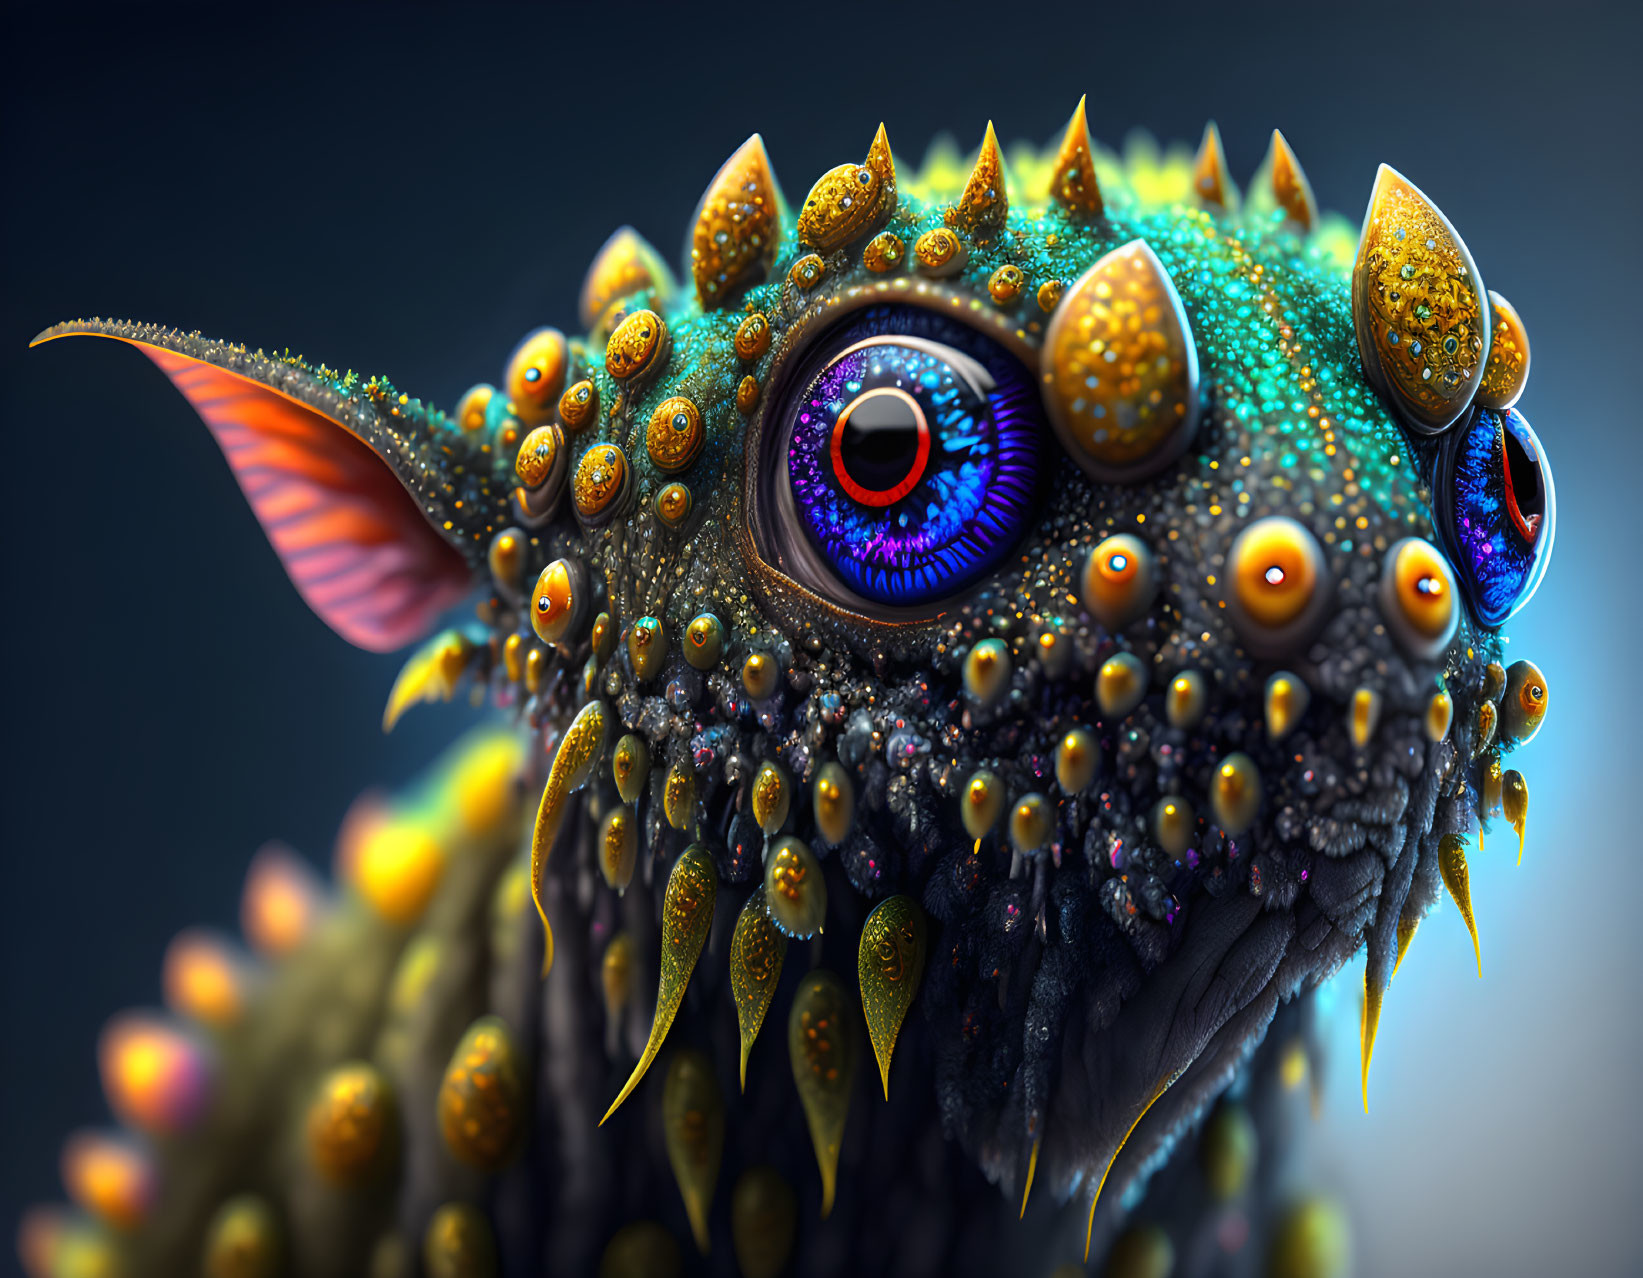 Colorful Fantastical Creature with Multiple Eyes and Iridescent Scales